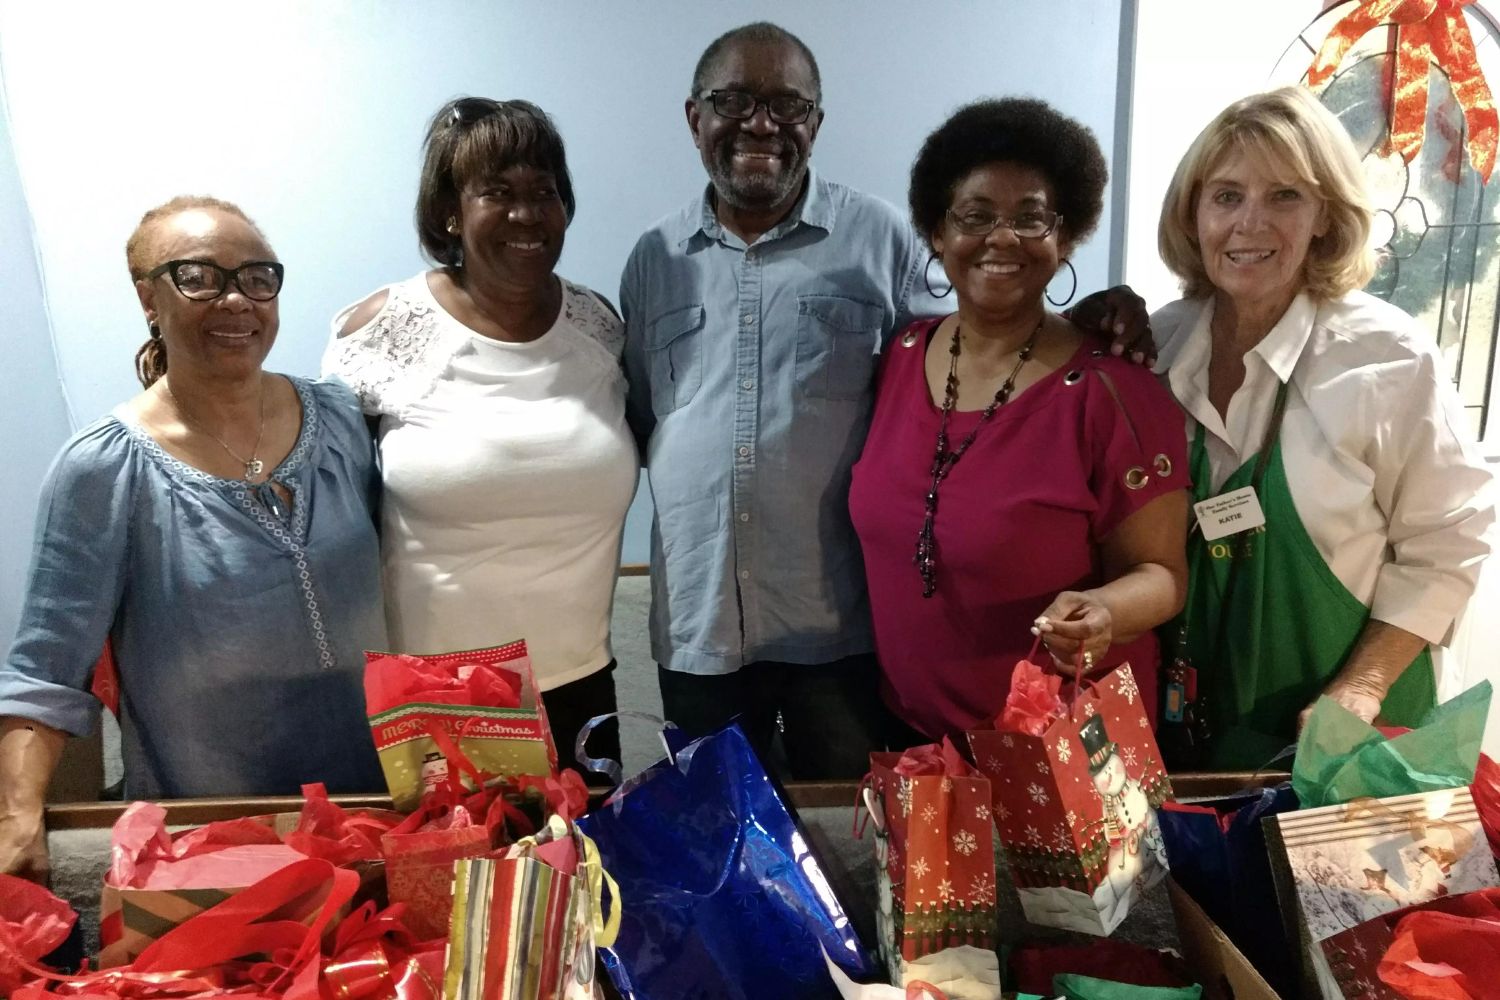 Soup kitchen volunteers at Christmas time with presents.